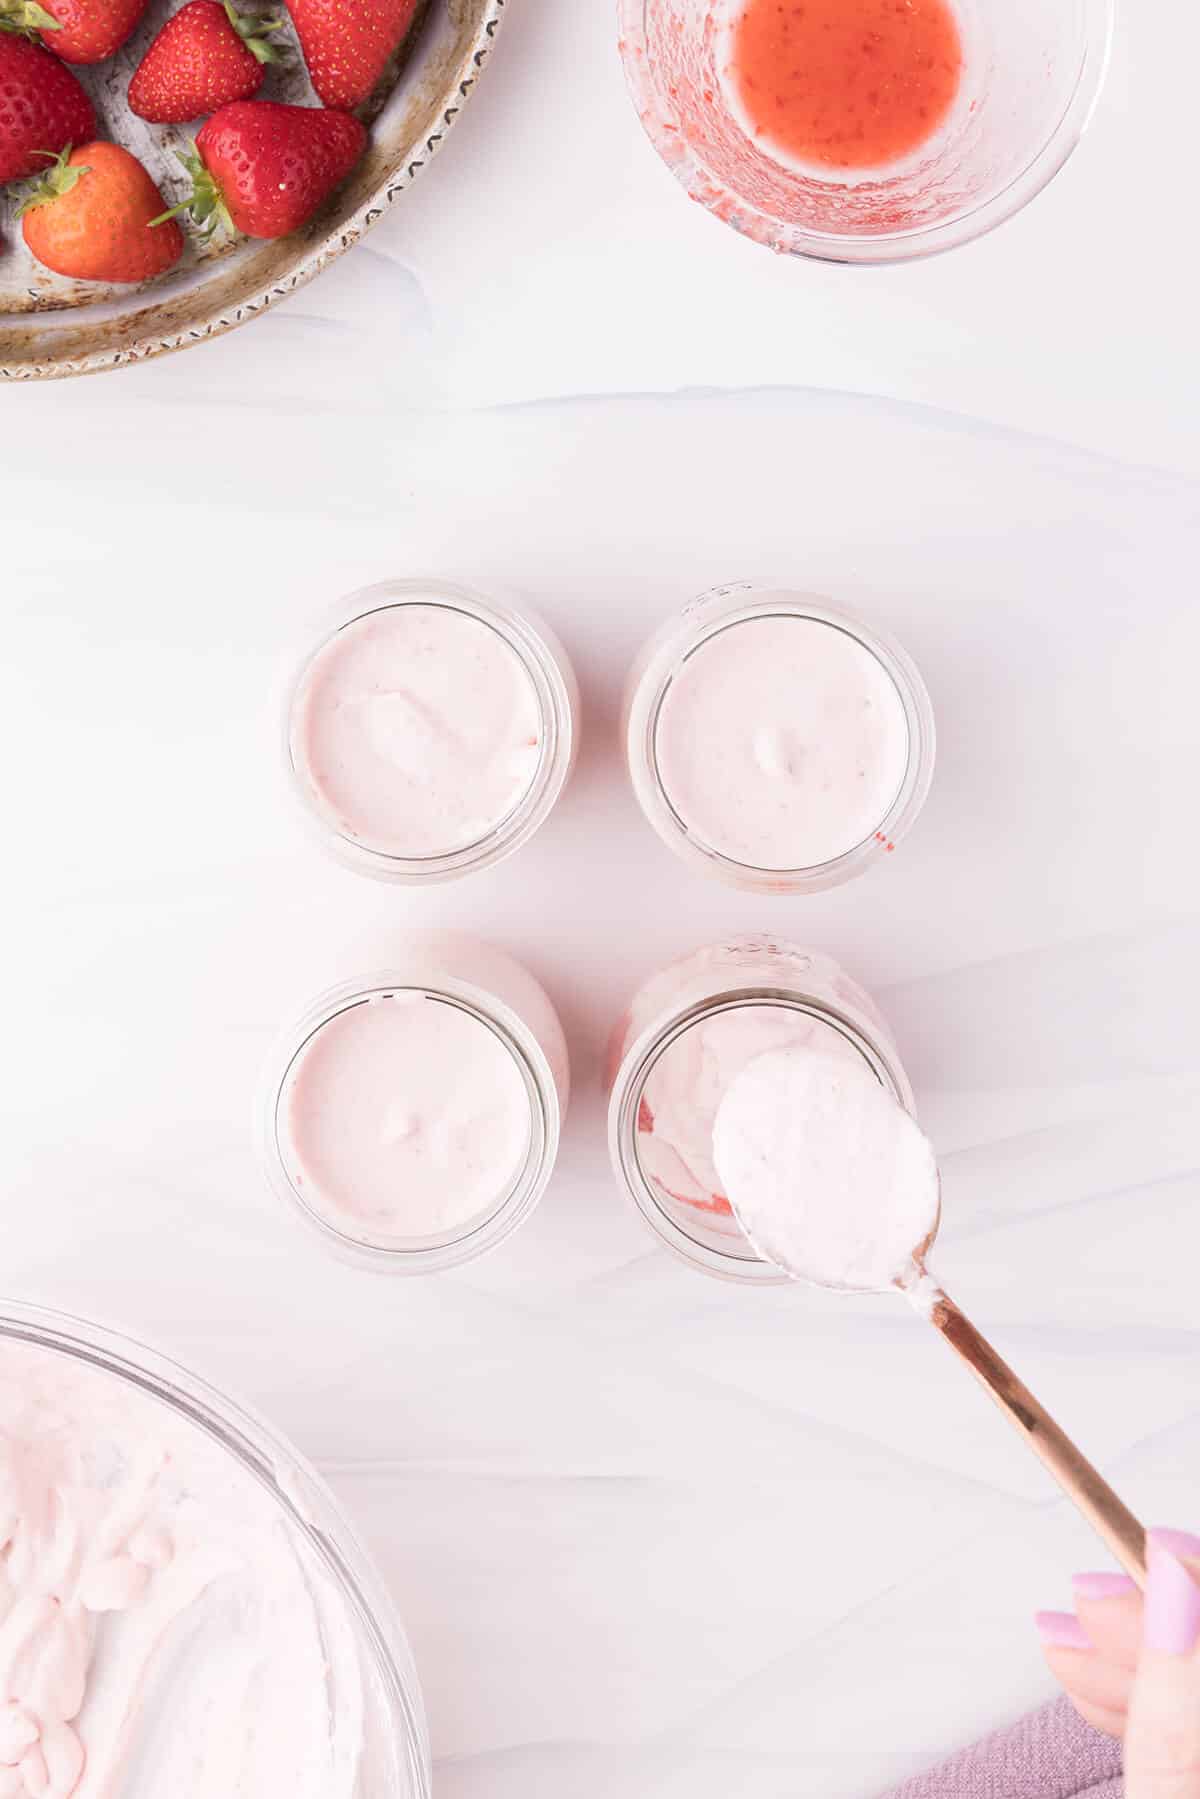 Adding the whipped strawberry cream to the glass jars.